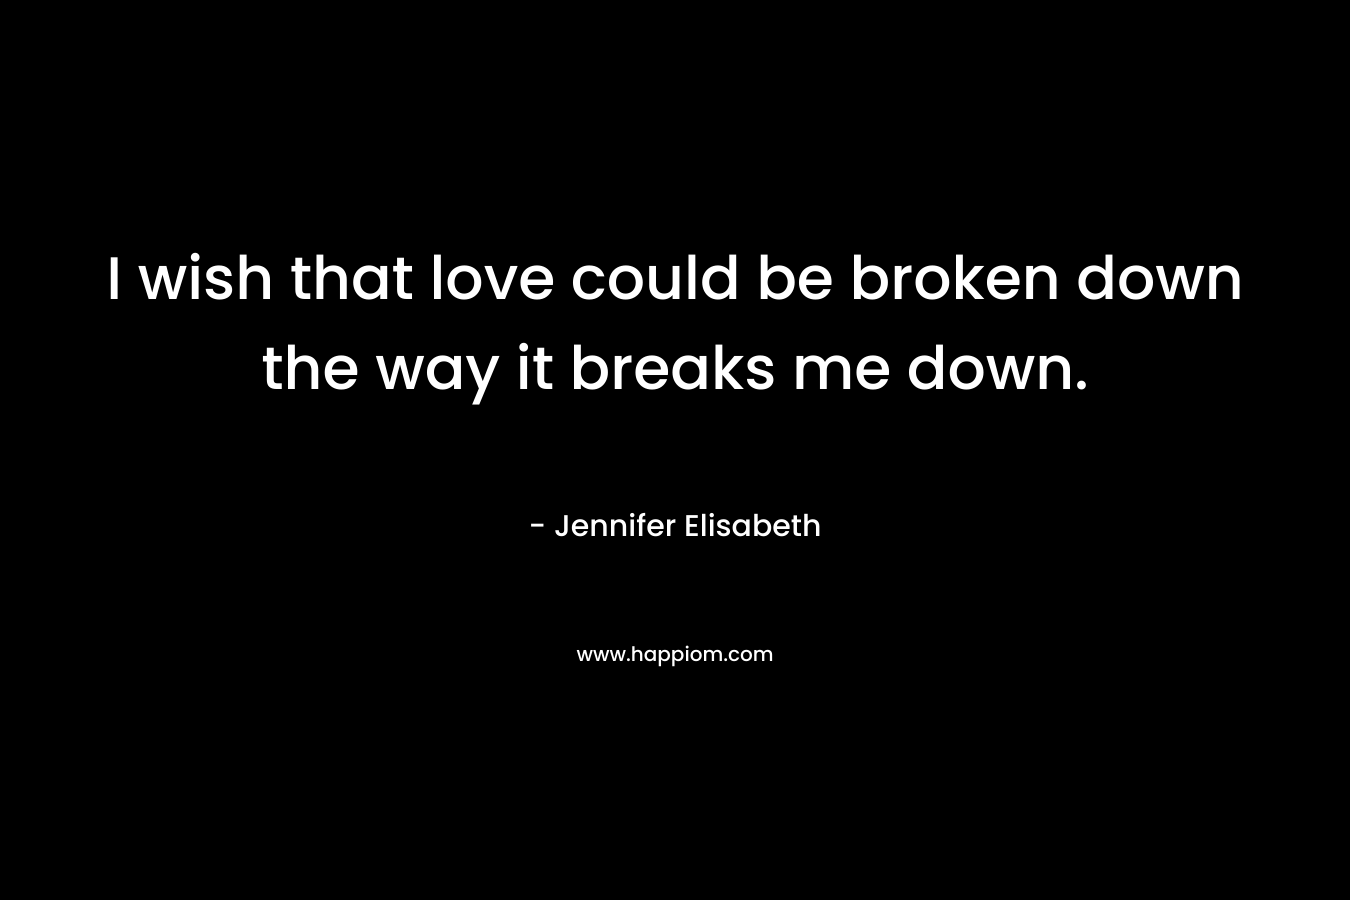 I wish that love could be broken down the way it breaks me down.